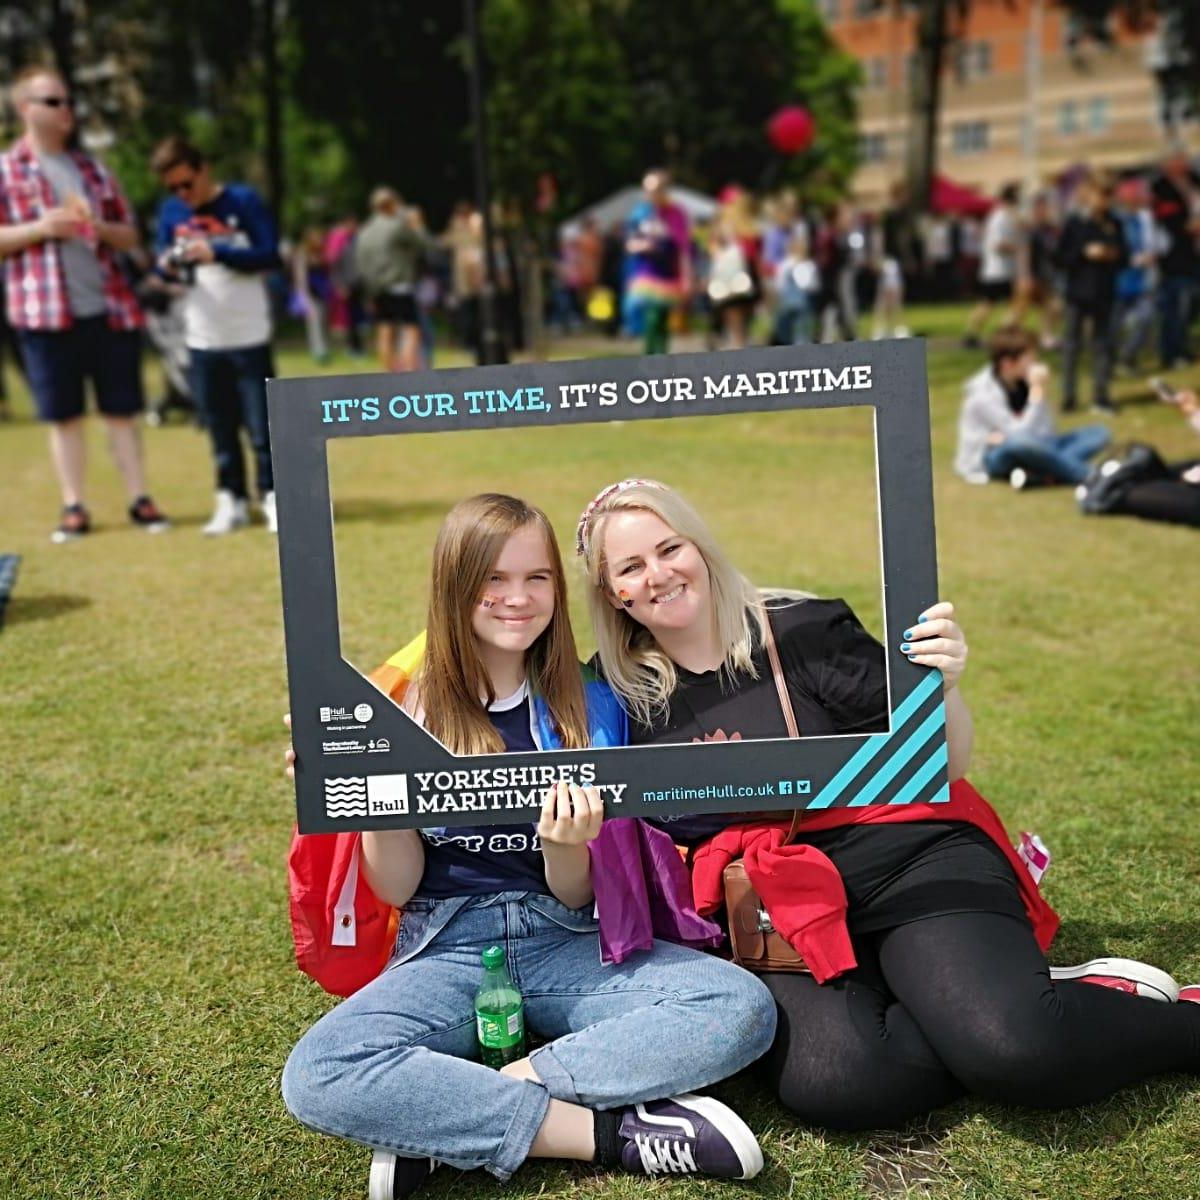 Members of the public pose in the selfie frame at Hull Pride